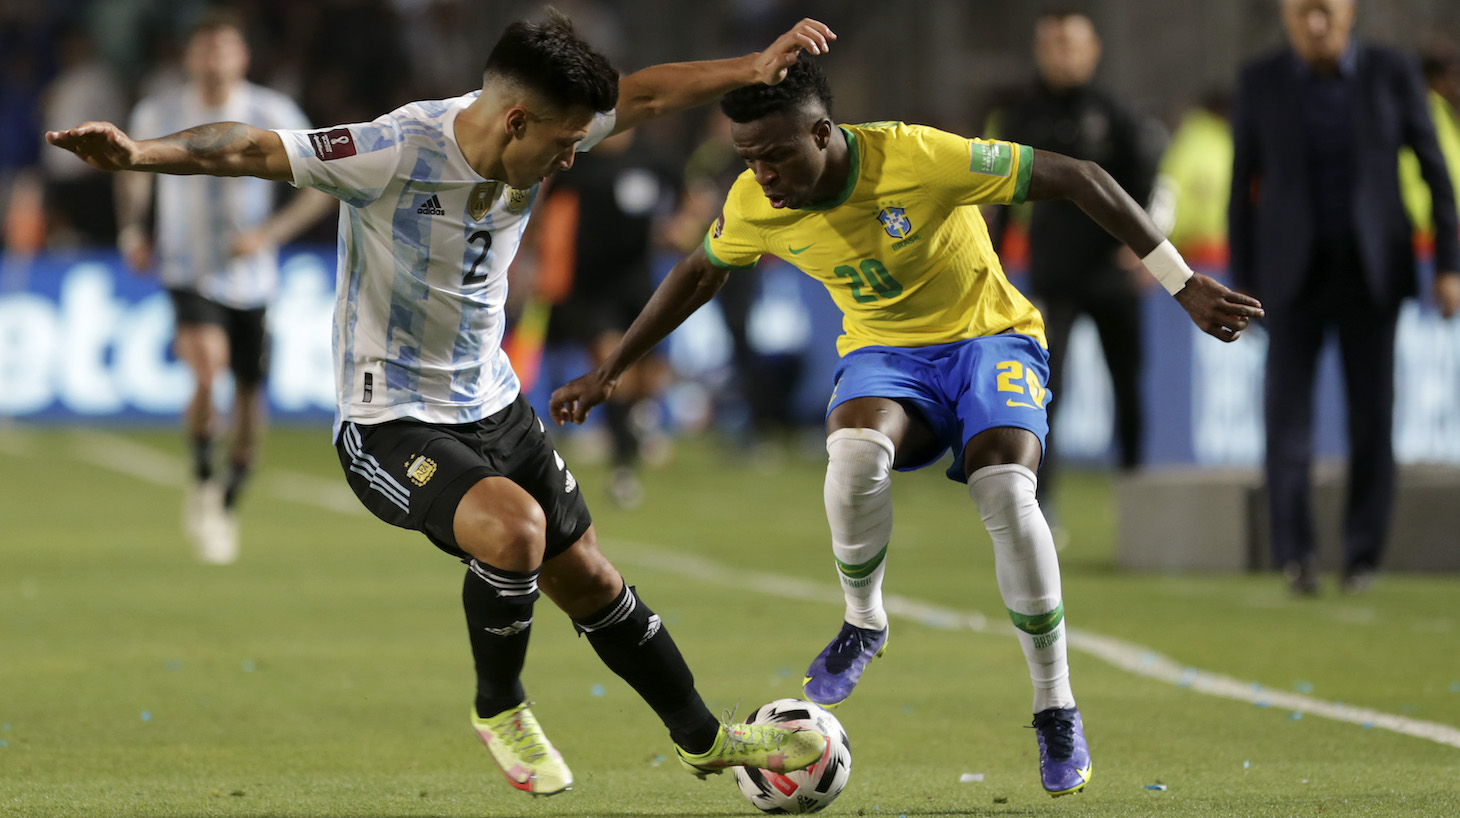 Lisandro Martínez of Argentina competes for the ball with Vinicius Junior of Brazil during a match between Argentina and Brazil as part of FIFA World Cup Qatar 2022 Qualifiers at San Juan del Bicentenario Stadium on November 16, 2021 in San Juan, Argentina.